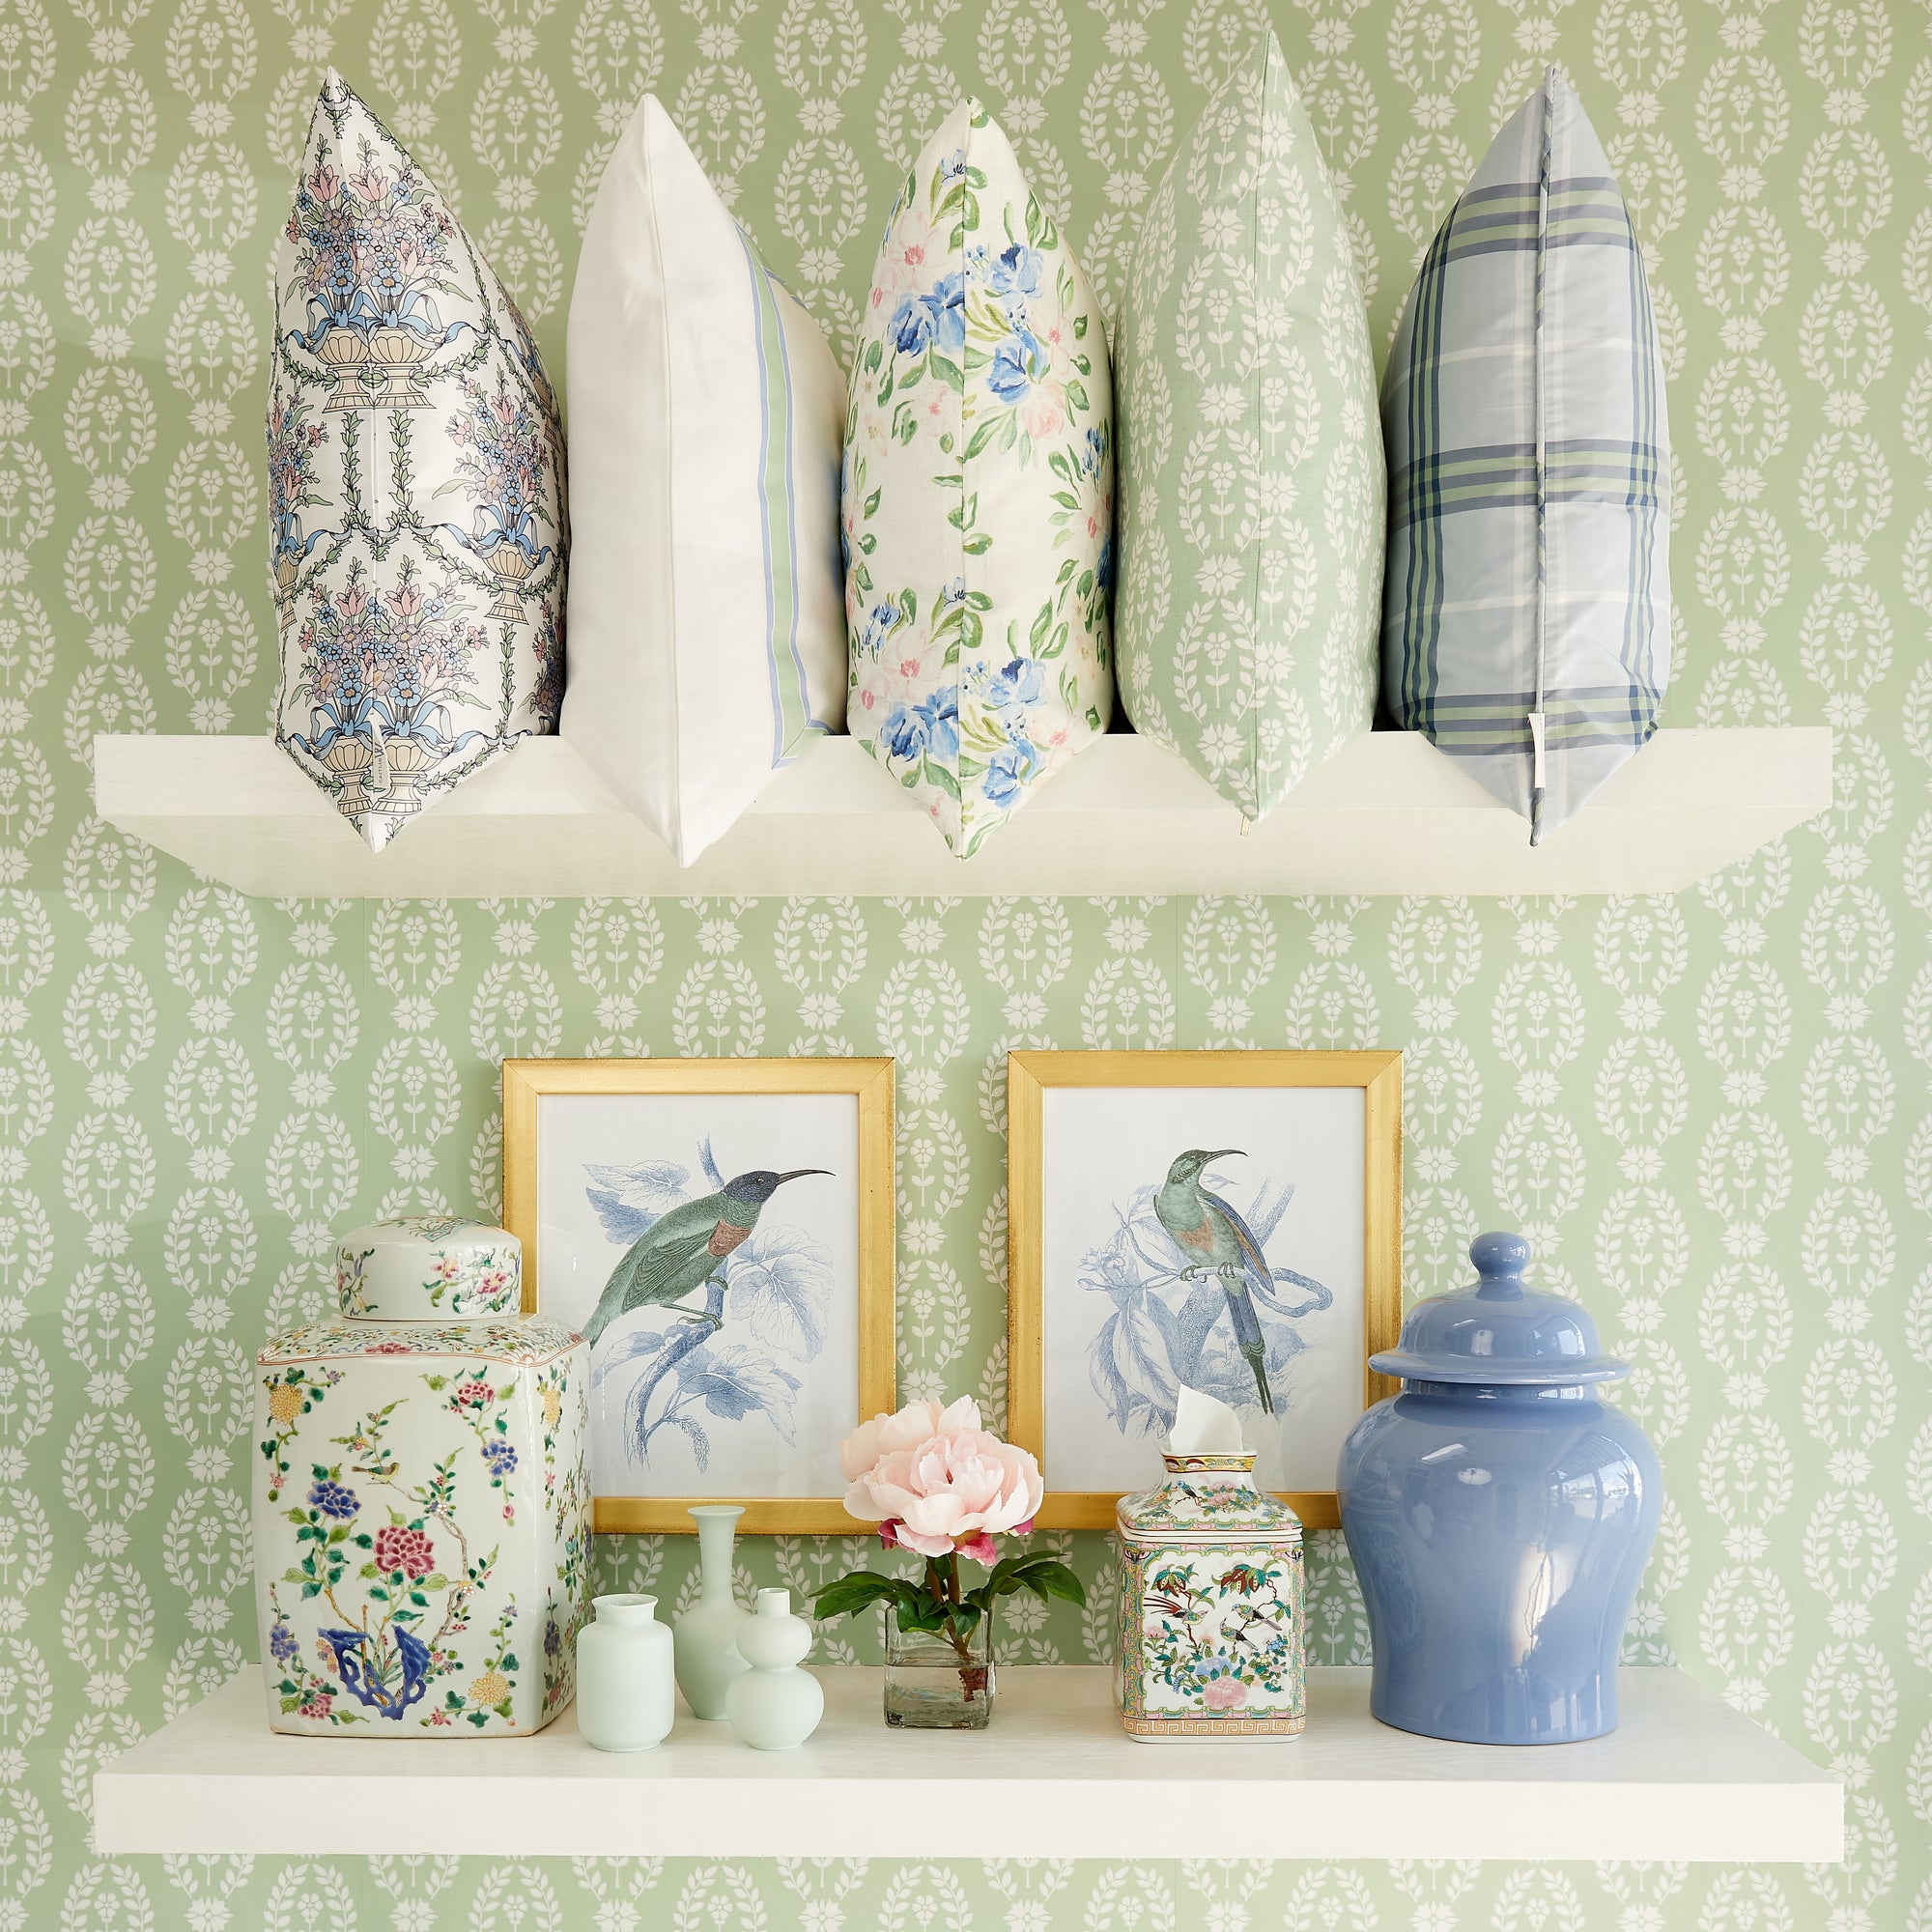 Laurel Green Floral Wallpaper Styled with Coordinating Throw Pillows